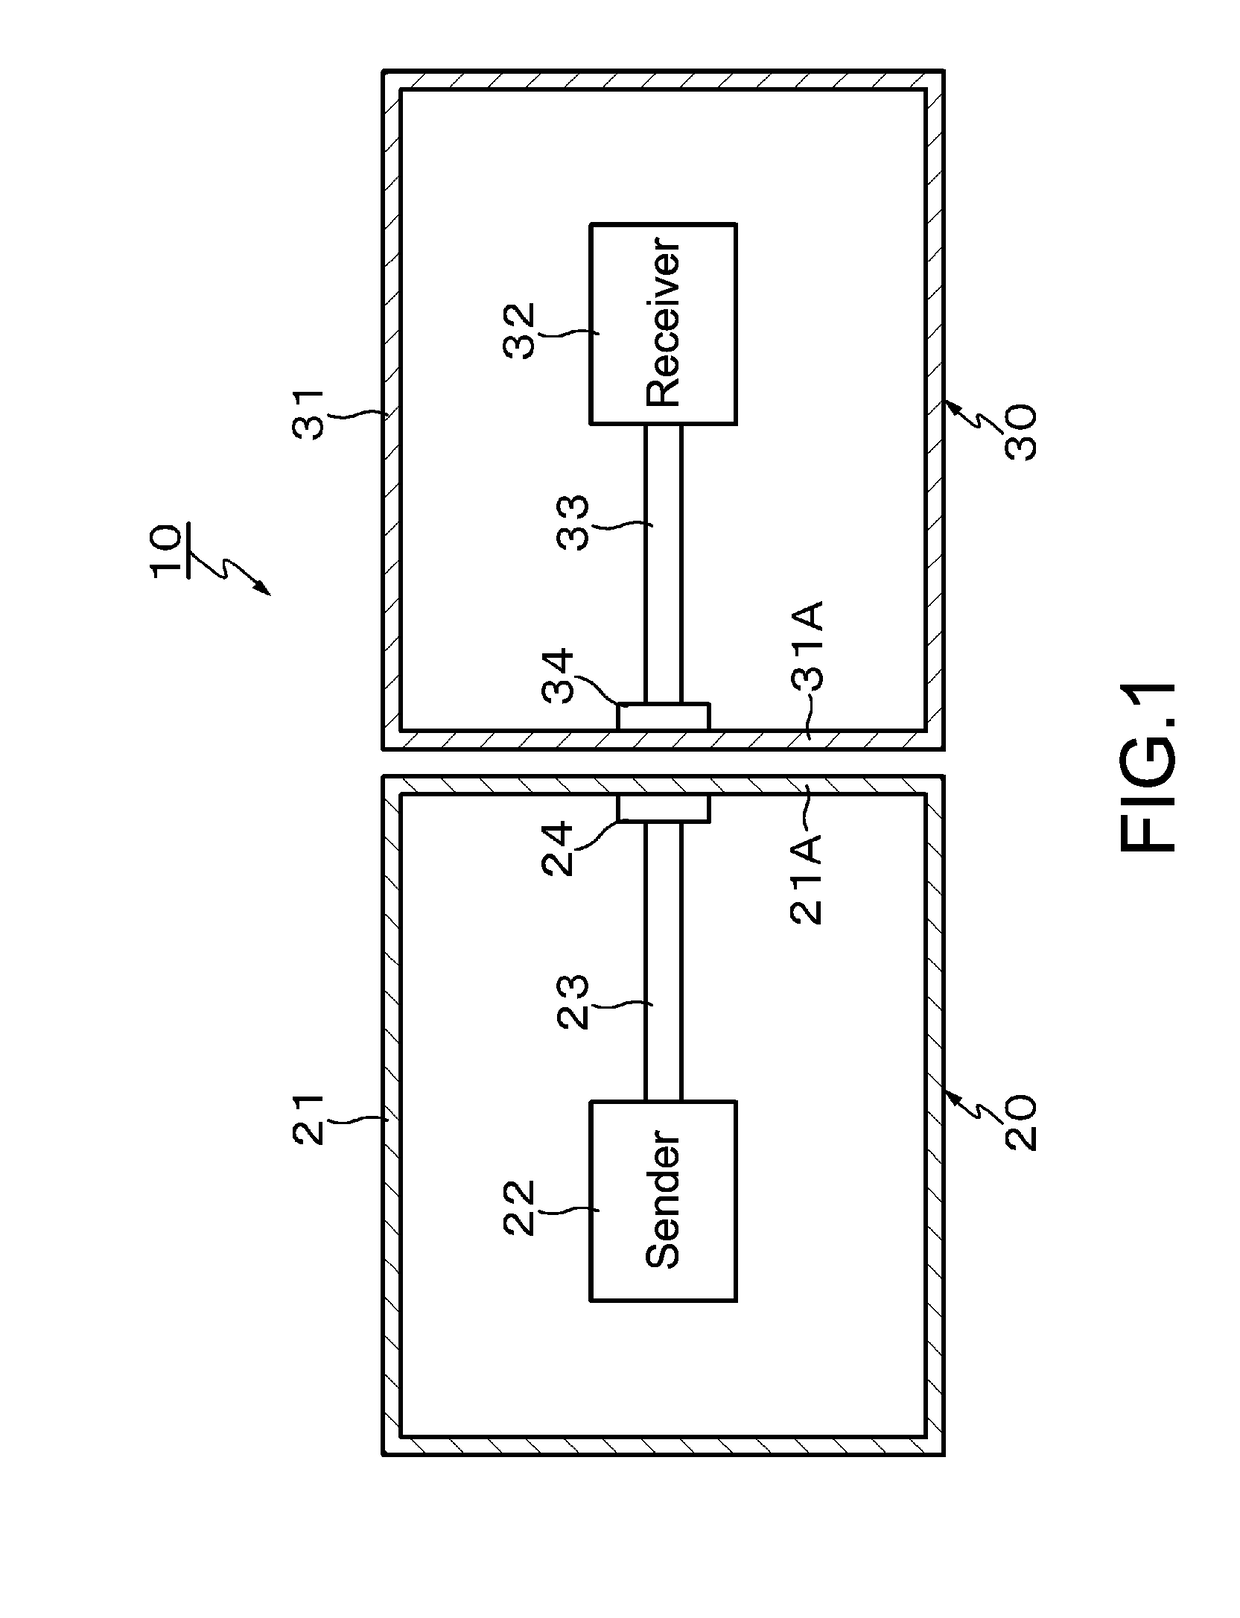 Communication system comprising a connector having first and second waveguides disposed in proximity to each other for coupling millimeter-wave data signals